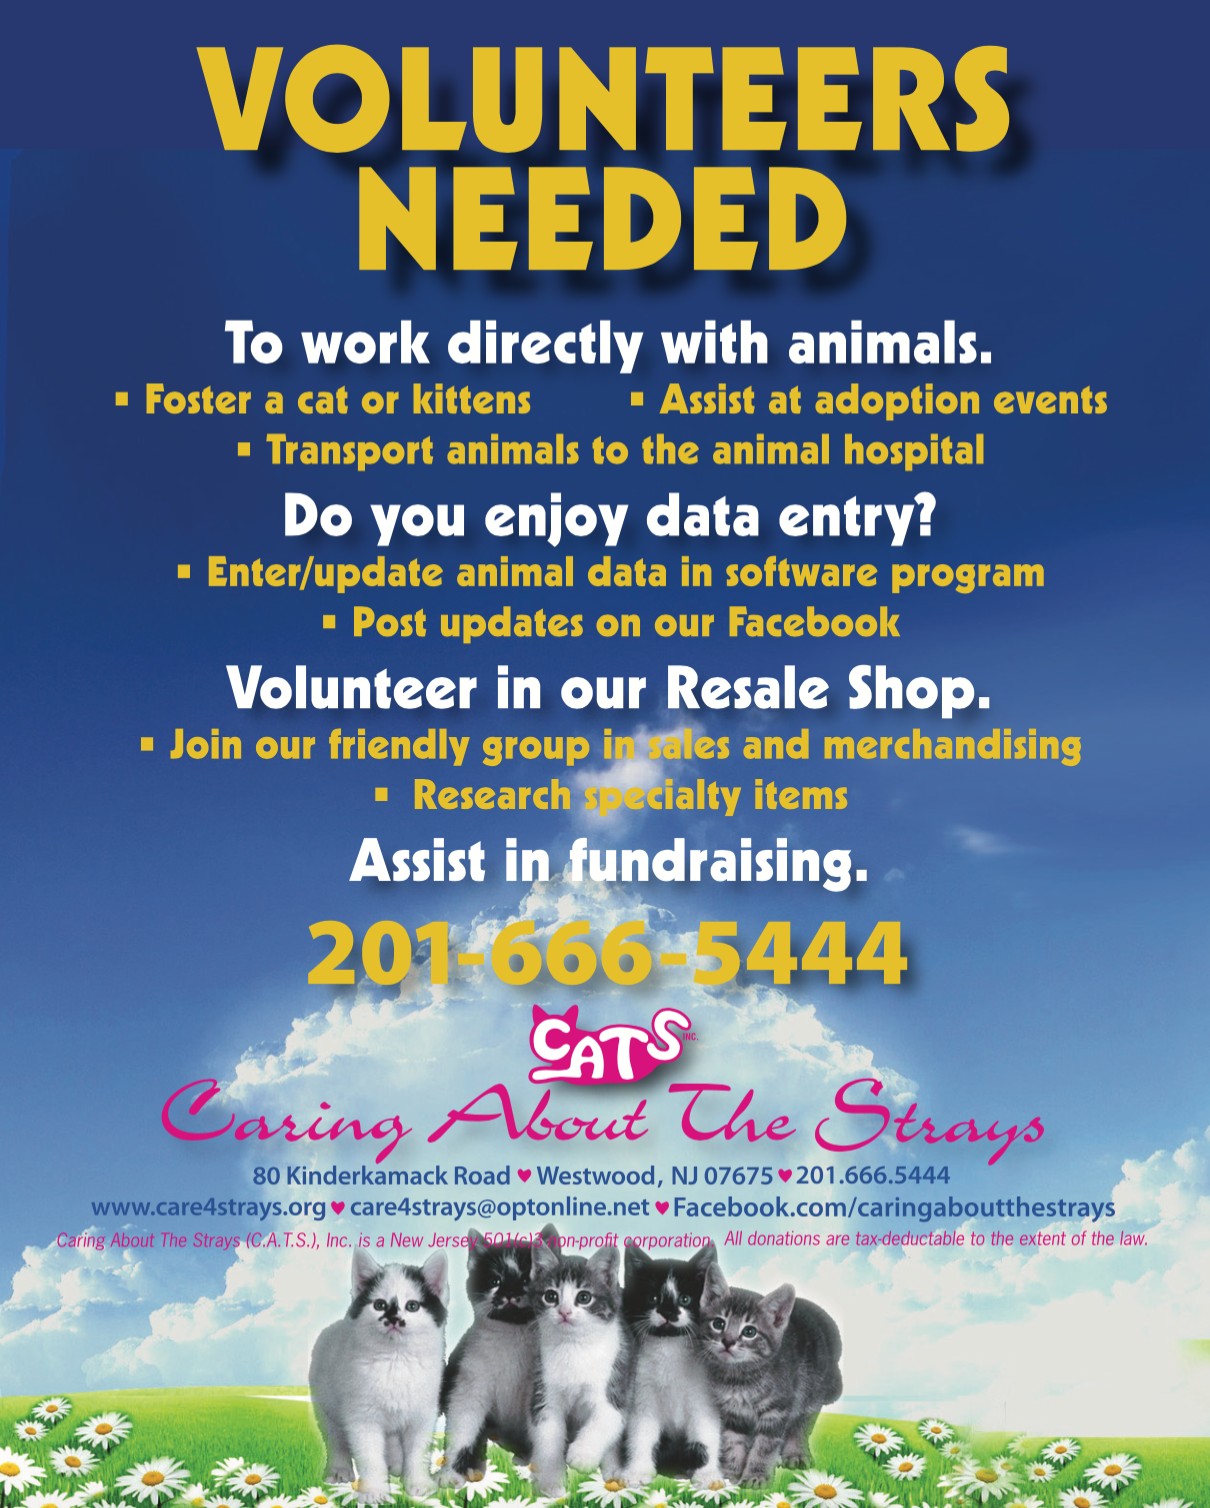 Volunteers — CARING ABOUT THE STRAYS